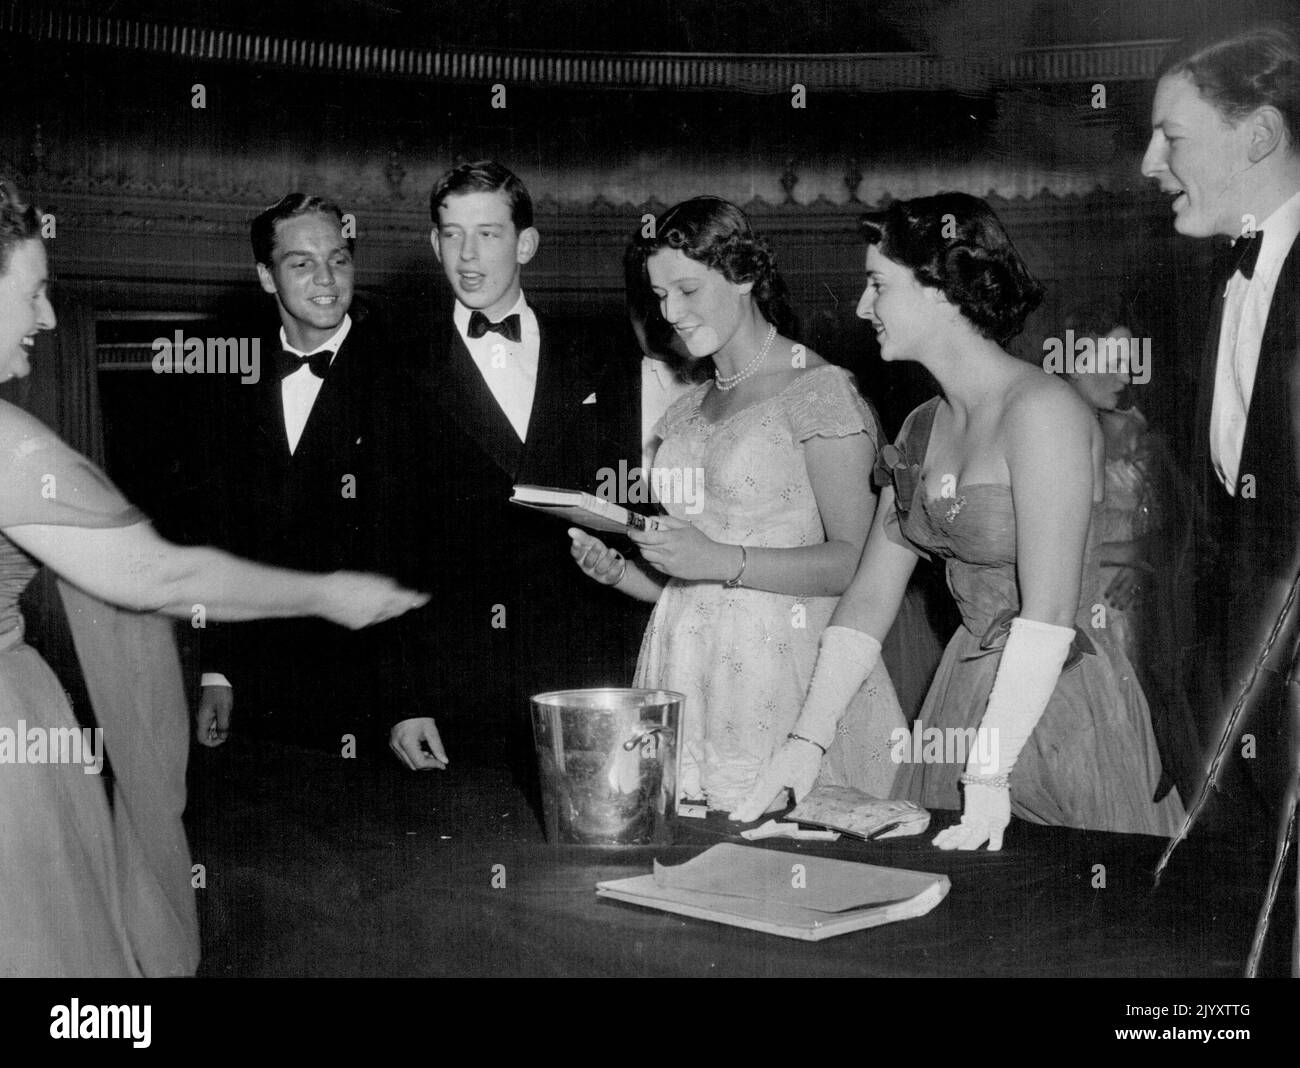 The Eton Beagles ball at the Dorchester Hotel on July 10th, 1953 Mrs. David Copland hands the prizes of a book to Princess Alexandra which she won at the Tombola from l to r are Mr. Jeremy James, The Duke of Kent Princess Alexander, Princess Elizabeth of Yugoslavia and the Hon, Angus Ogilvy. August 24, 1953. Stock Photo